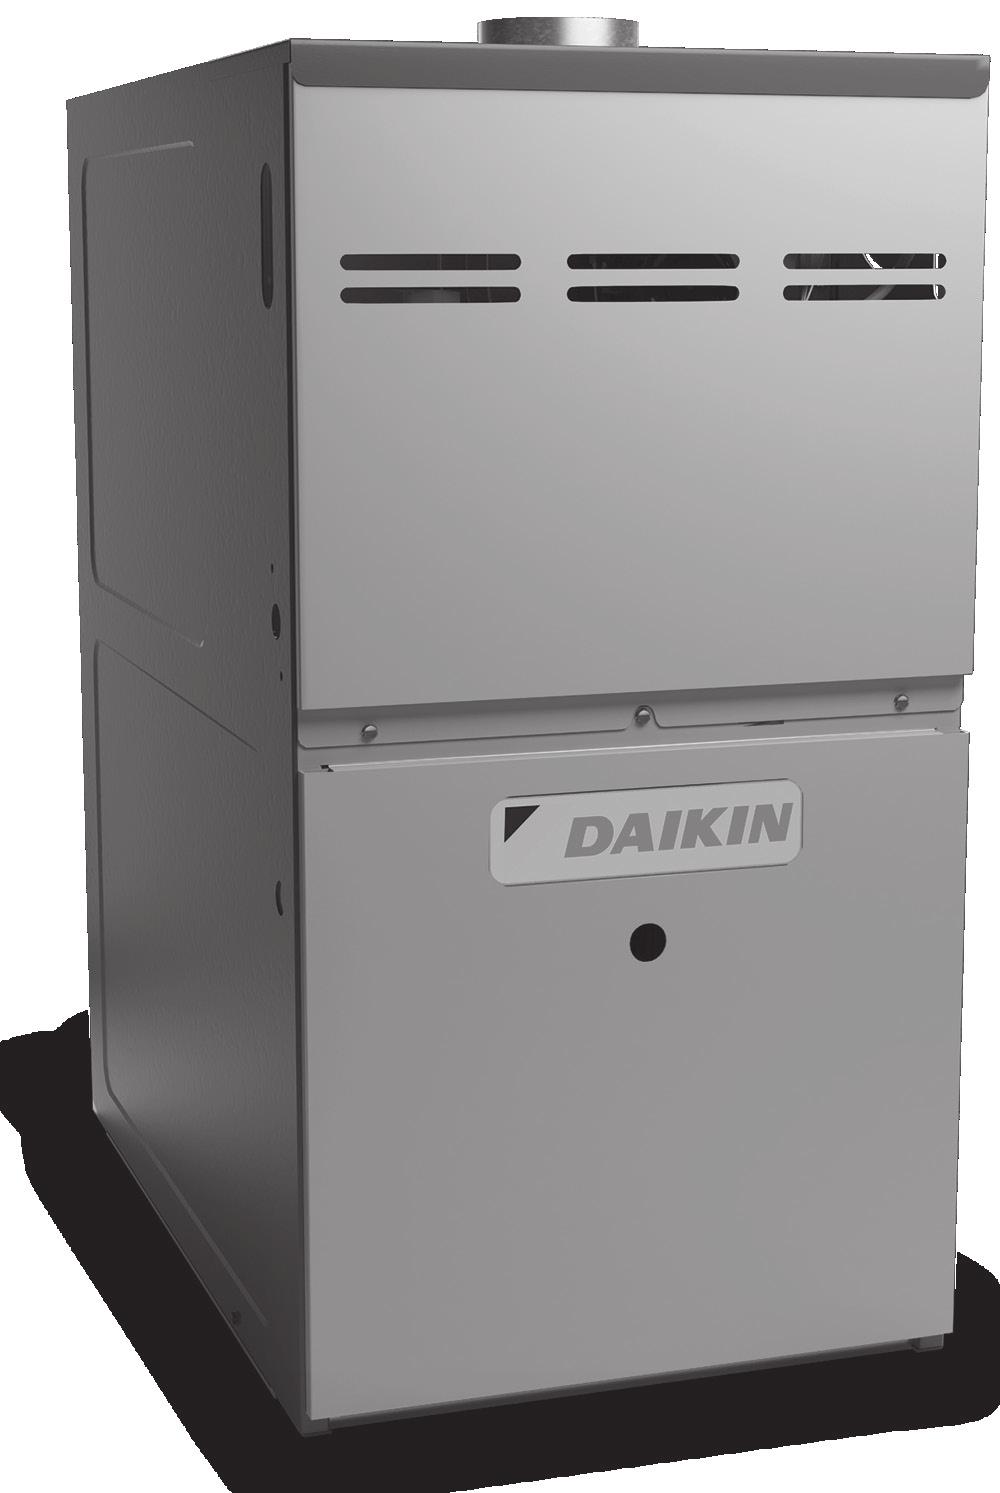 Two-Stage, onvertible Multi-Speed Gas Furnace 80% AFUE Heating Input: 40,000 140,000 BTU/h ontents Nomenclature...2 Product Specifications...3 Dimensions...4 Airflow Data...5 Wiring Diagram.